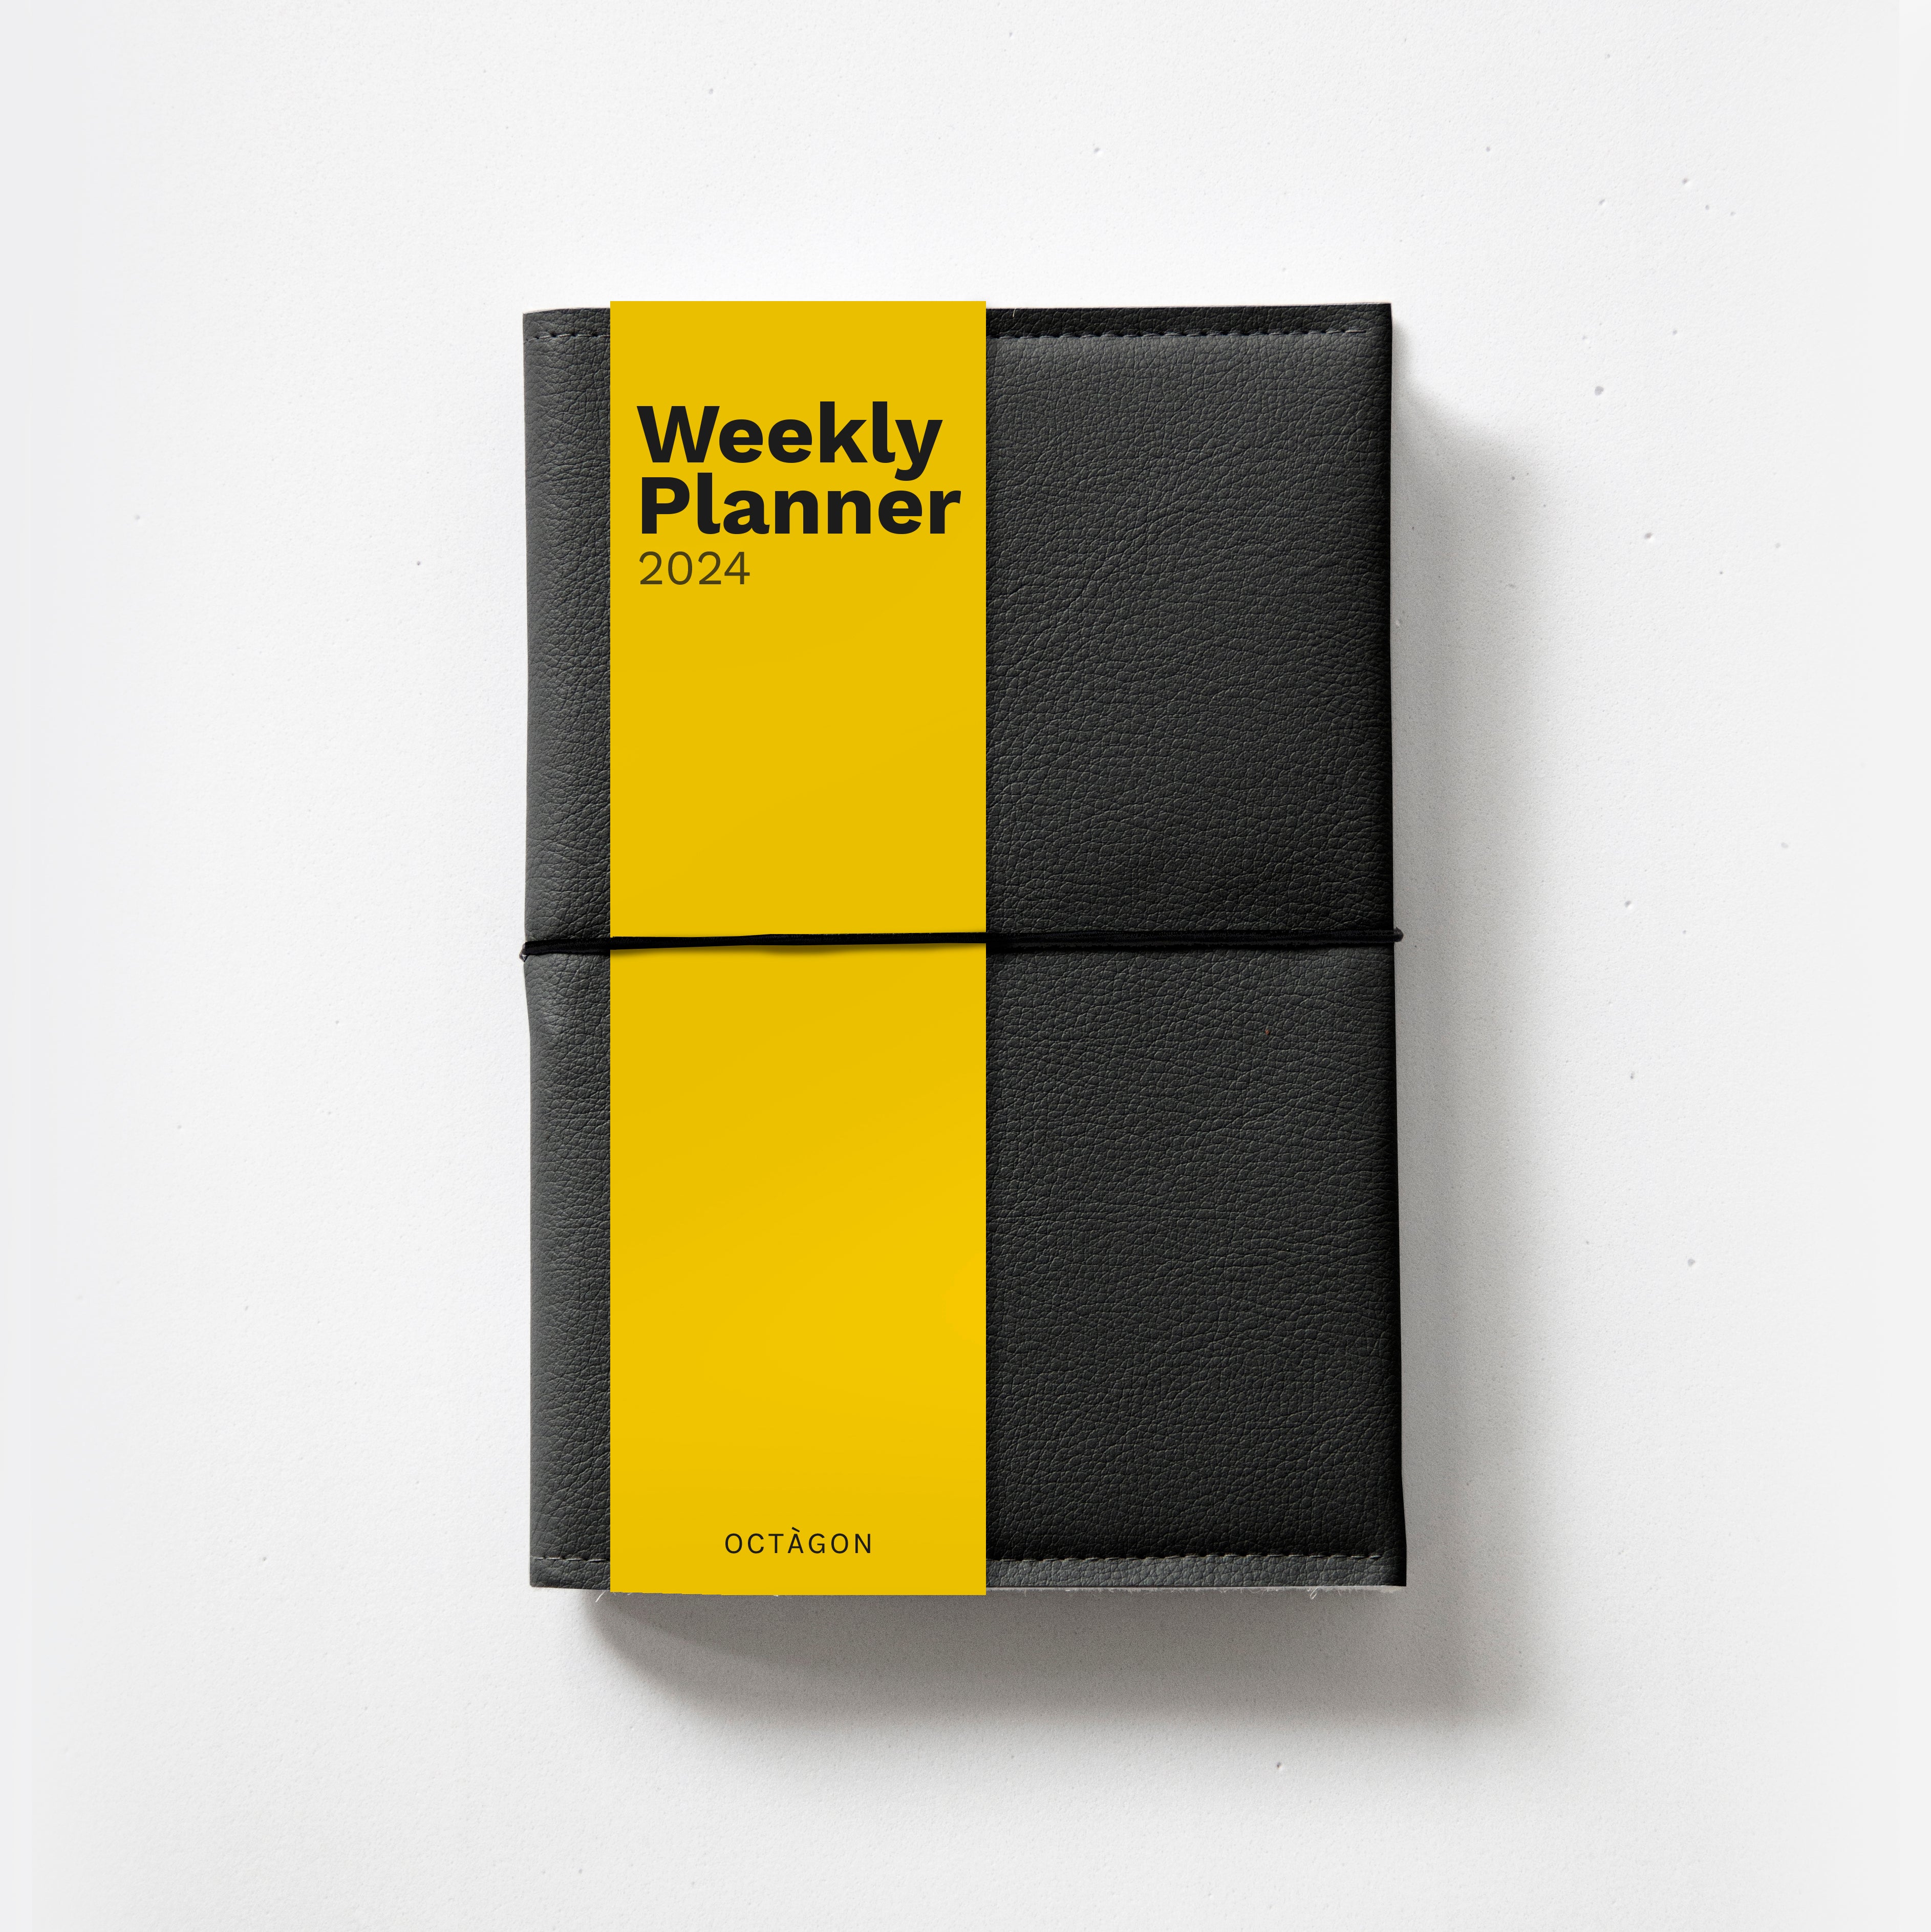 OCTÀGON DESIGN | 2024 PRO Weekly Planner | Vegan leather cover